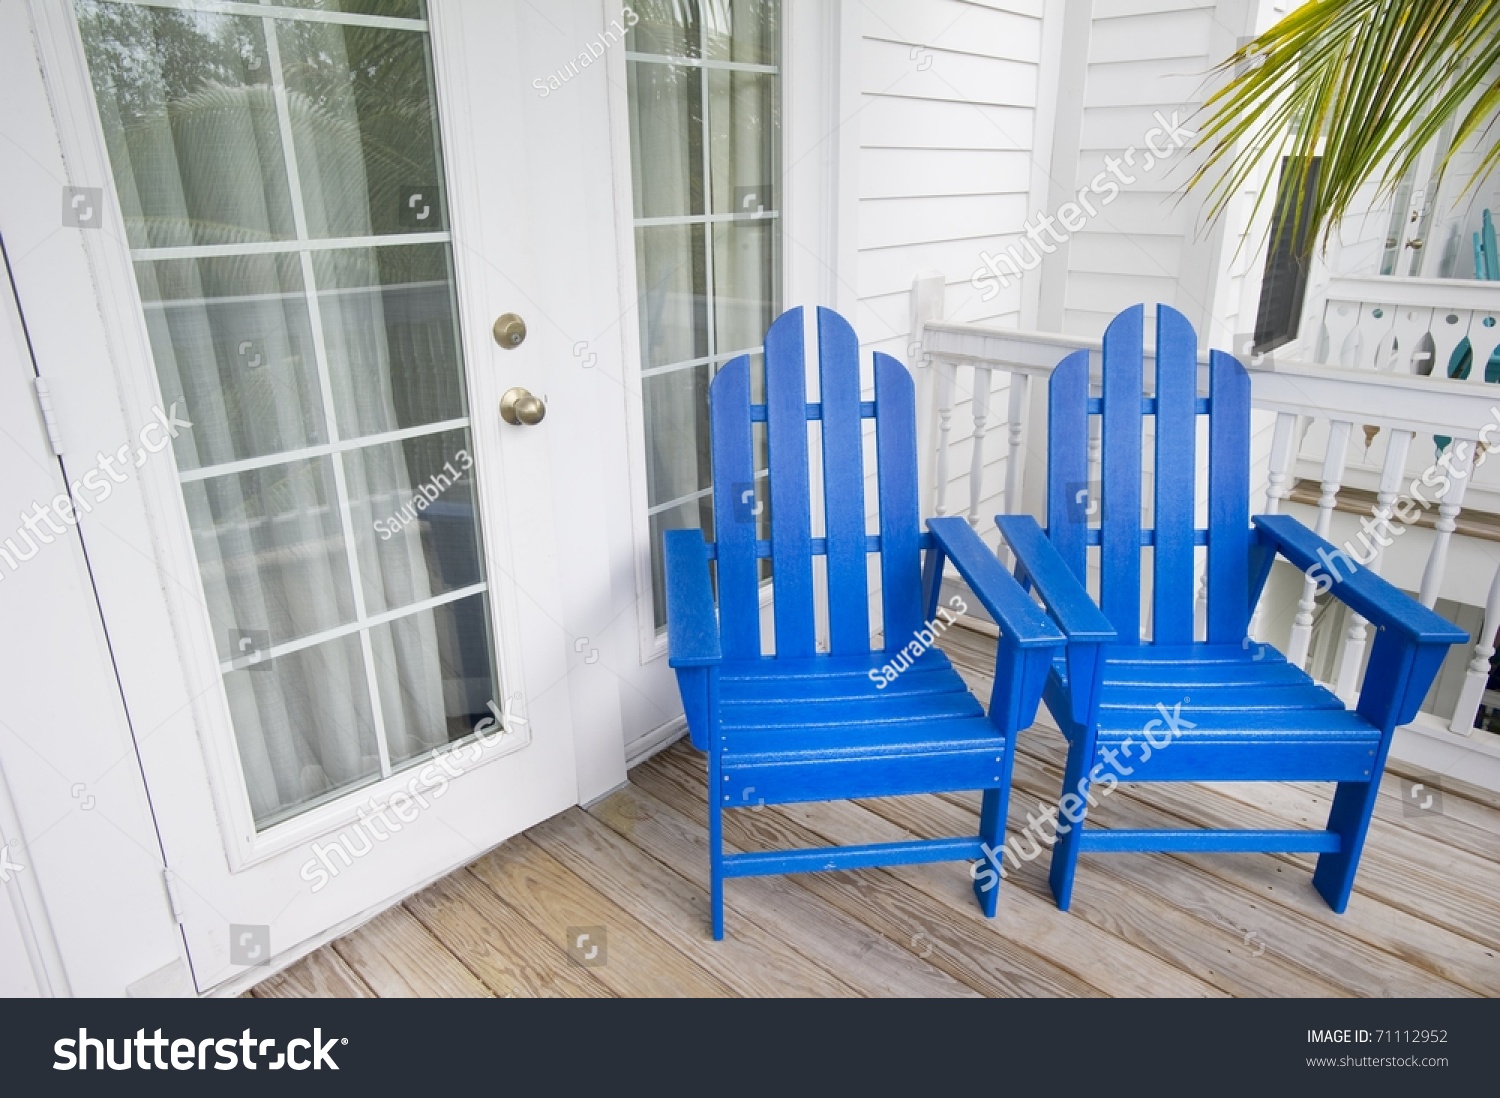 Relaxing Depiction Of Blue Adirondack Chairs In Key West Florida With A